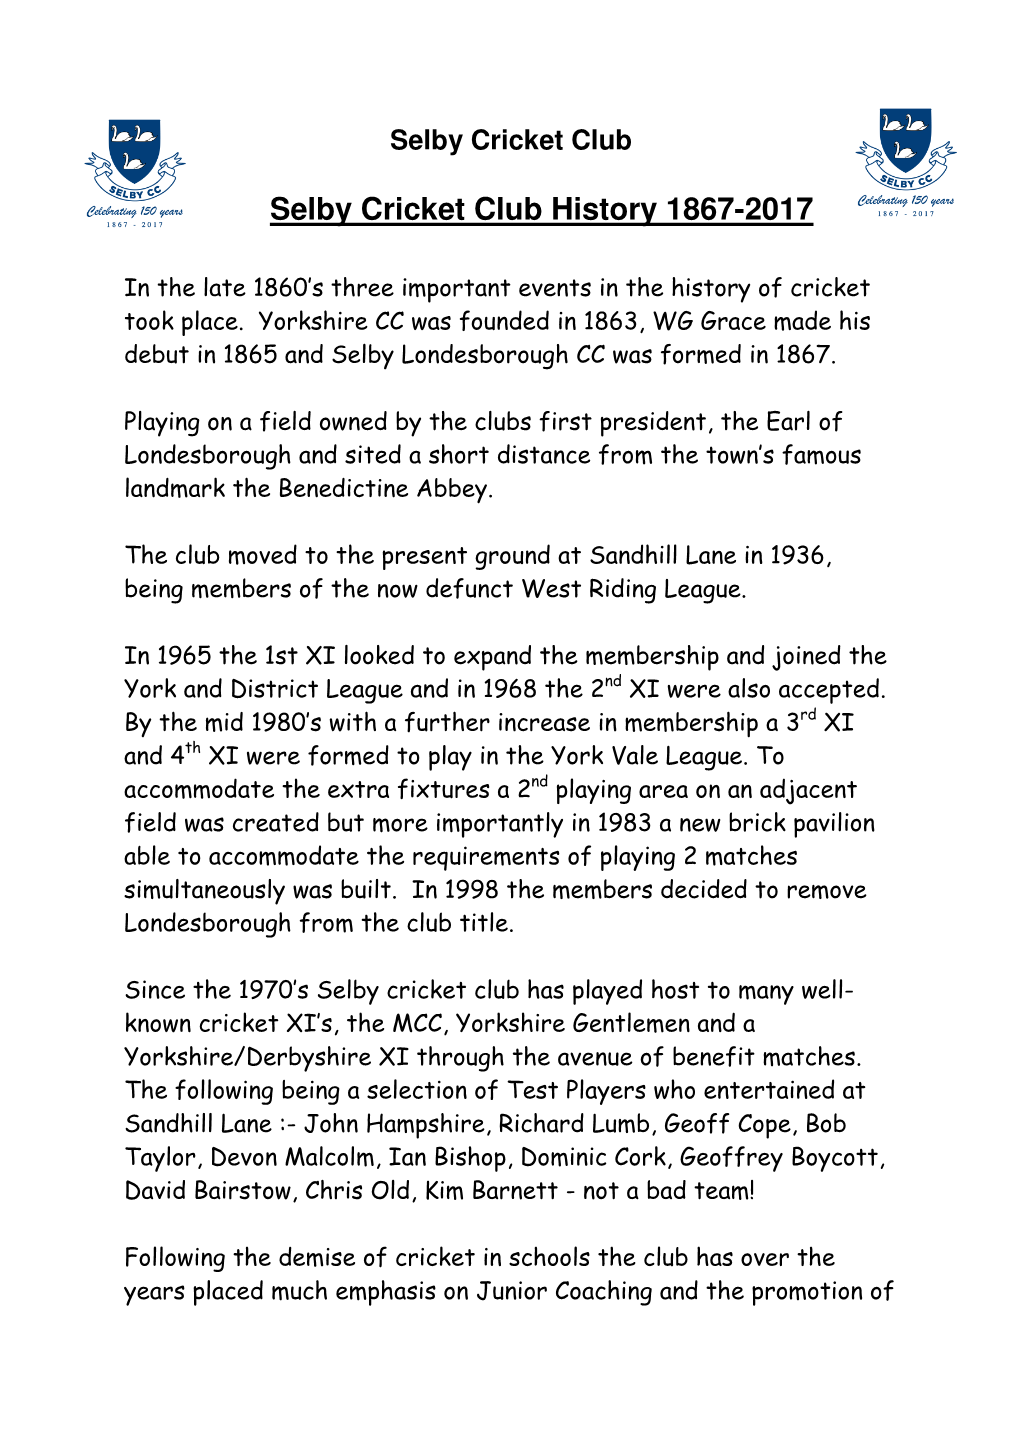 Selby Cricket Club History 1867-2017